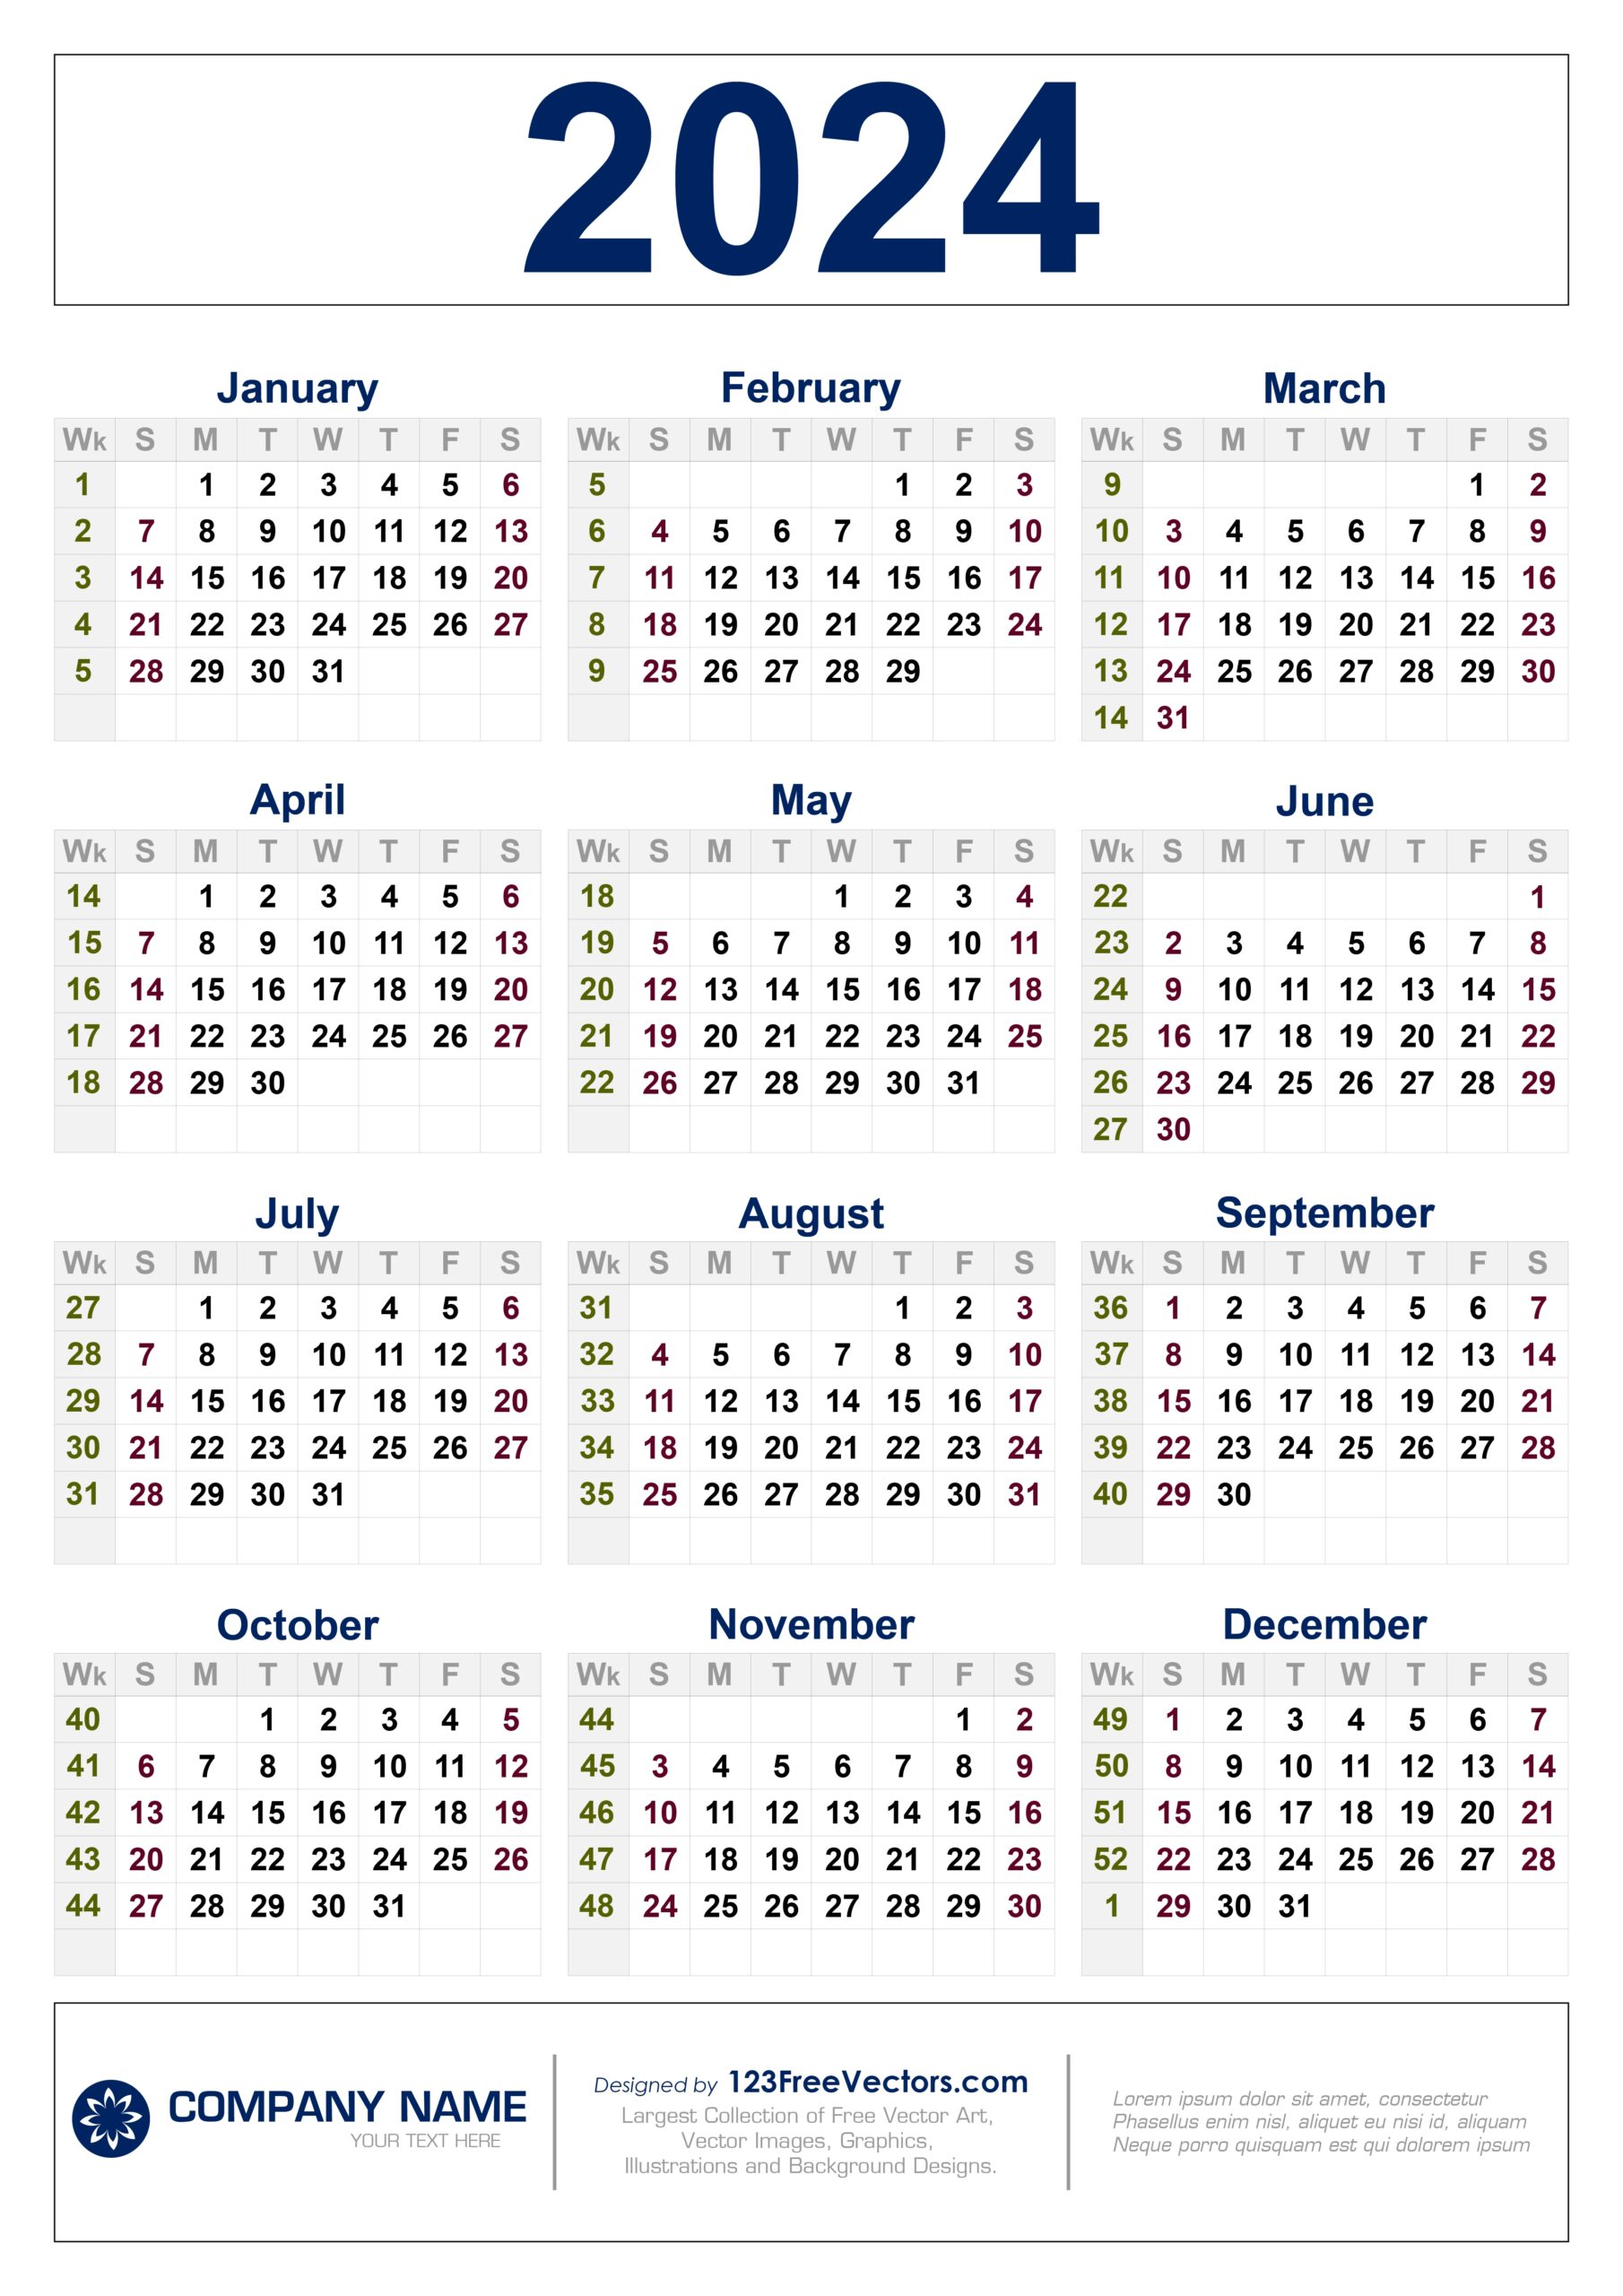 Free 2024 Calendar With Week Numbers pertaining to Free Printable Calendar 2024 With Week Numbers